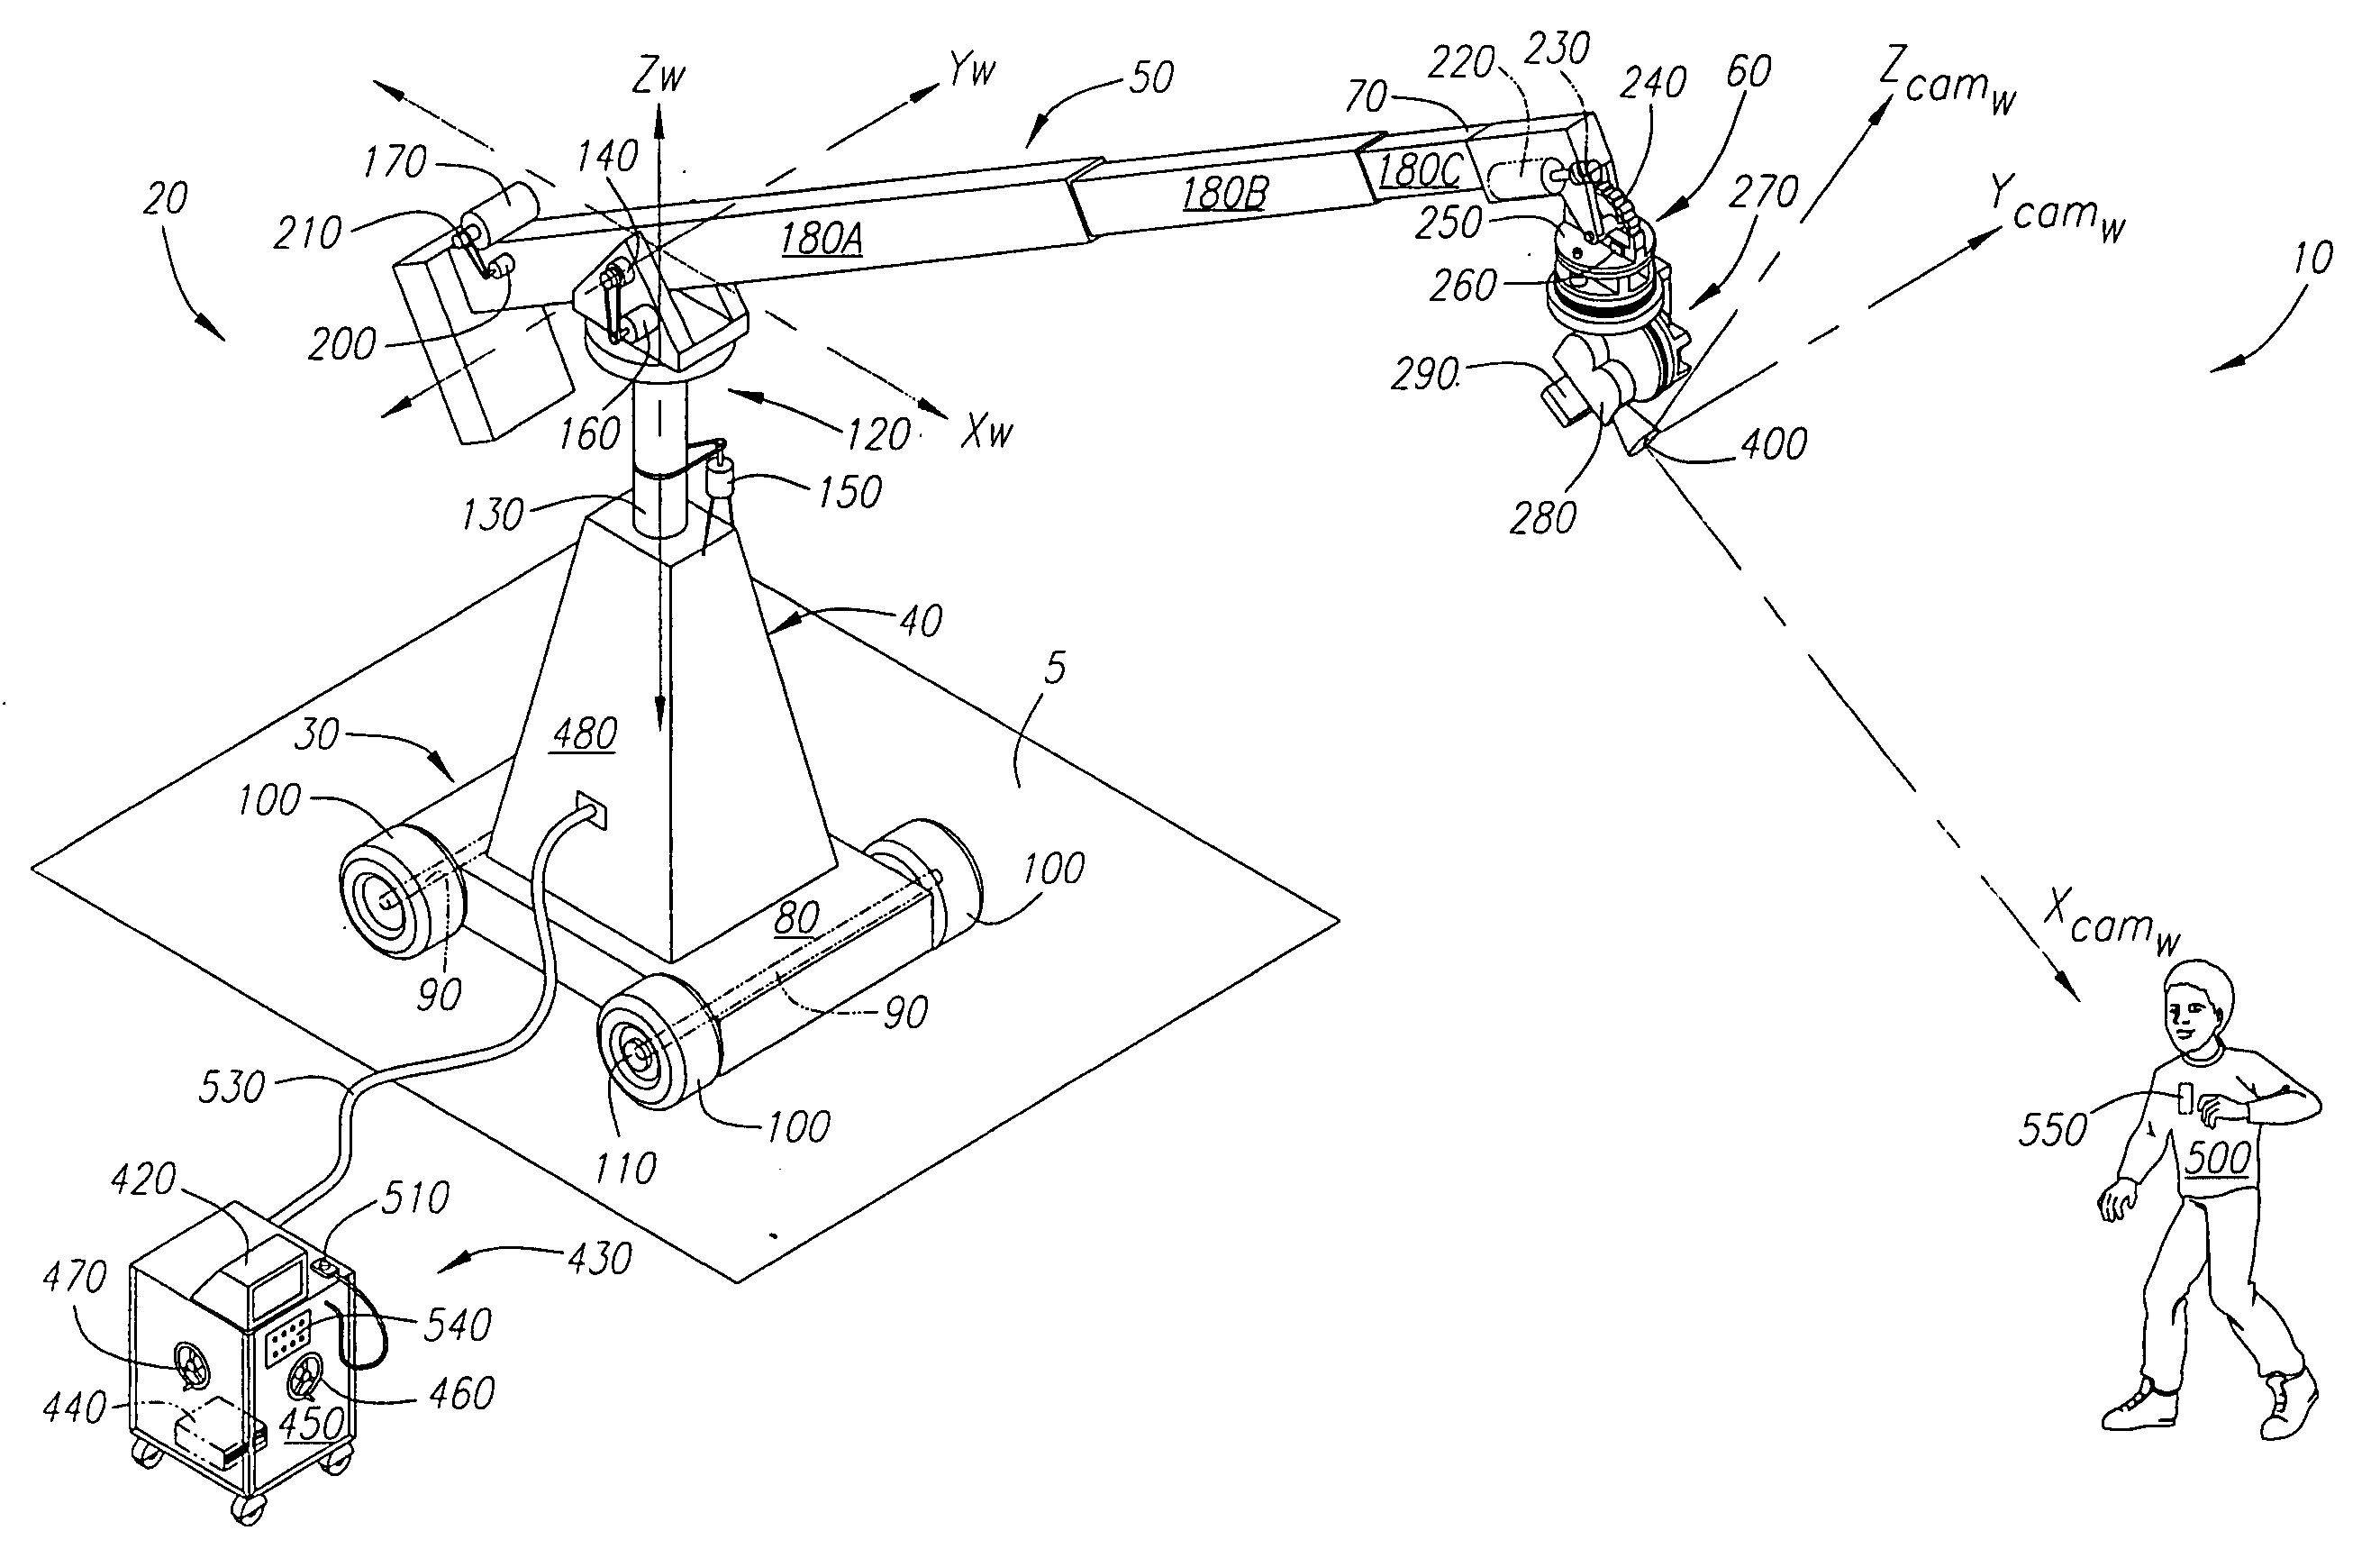 Automatic pan and tilt compensation system for a camera support structure